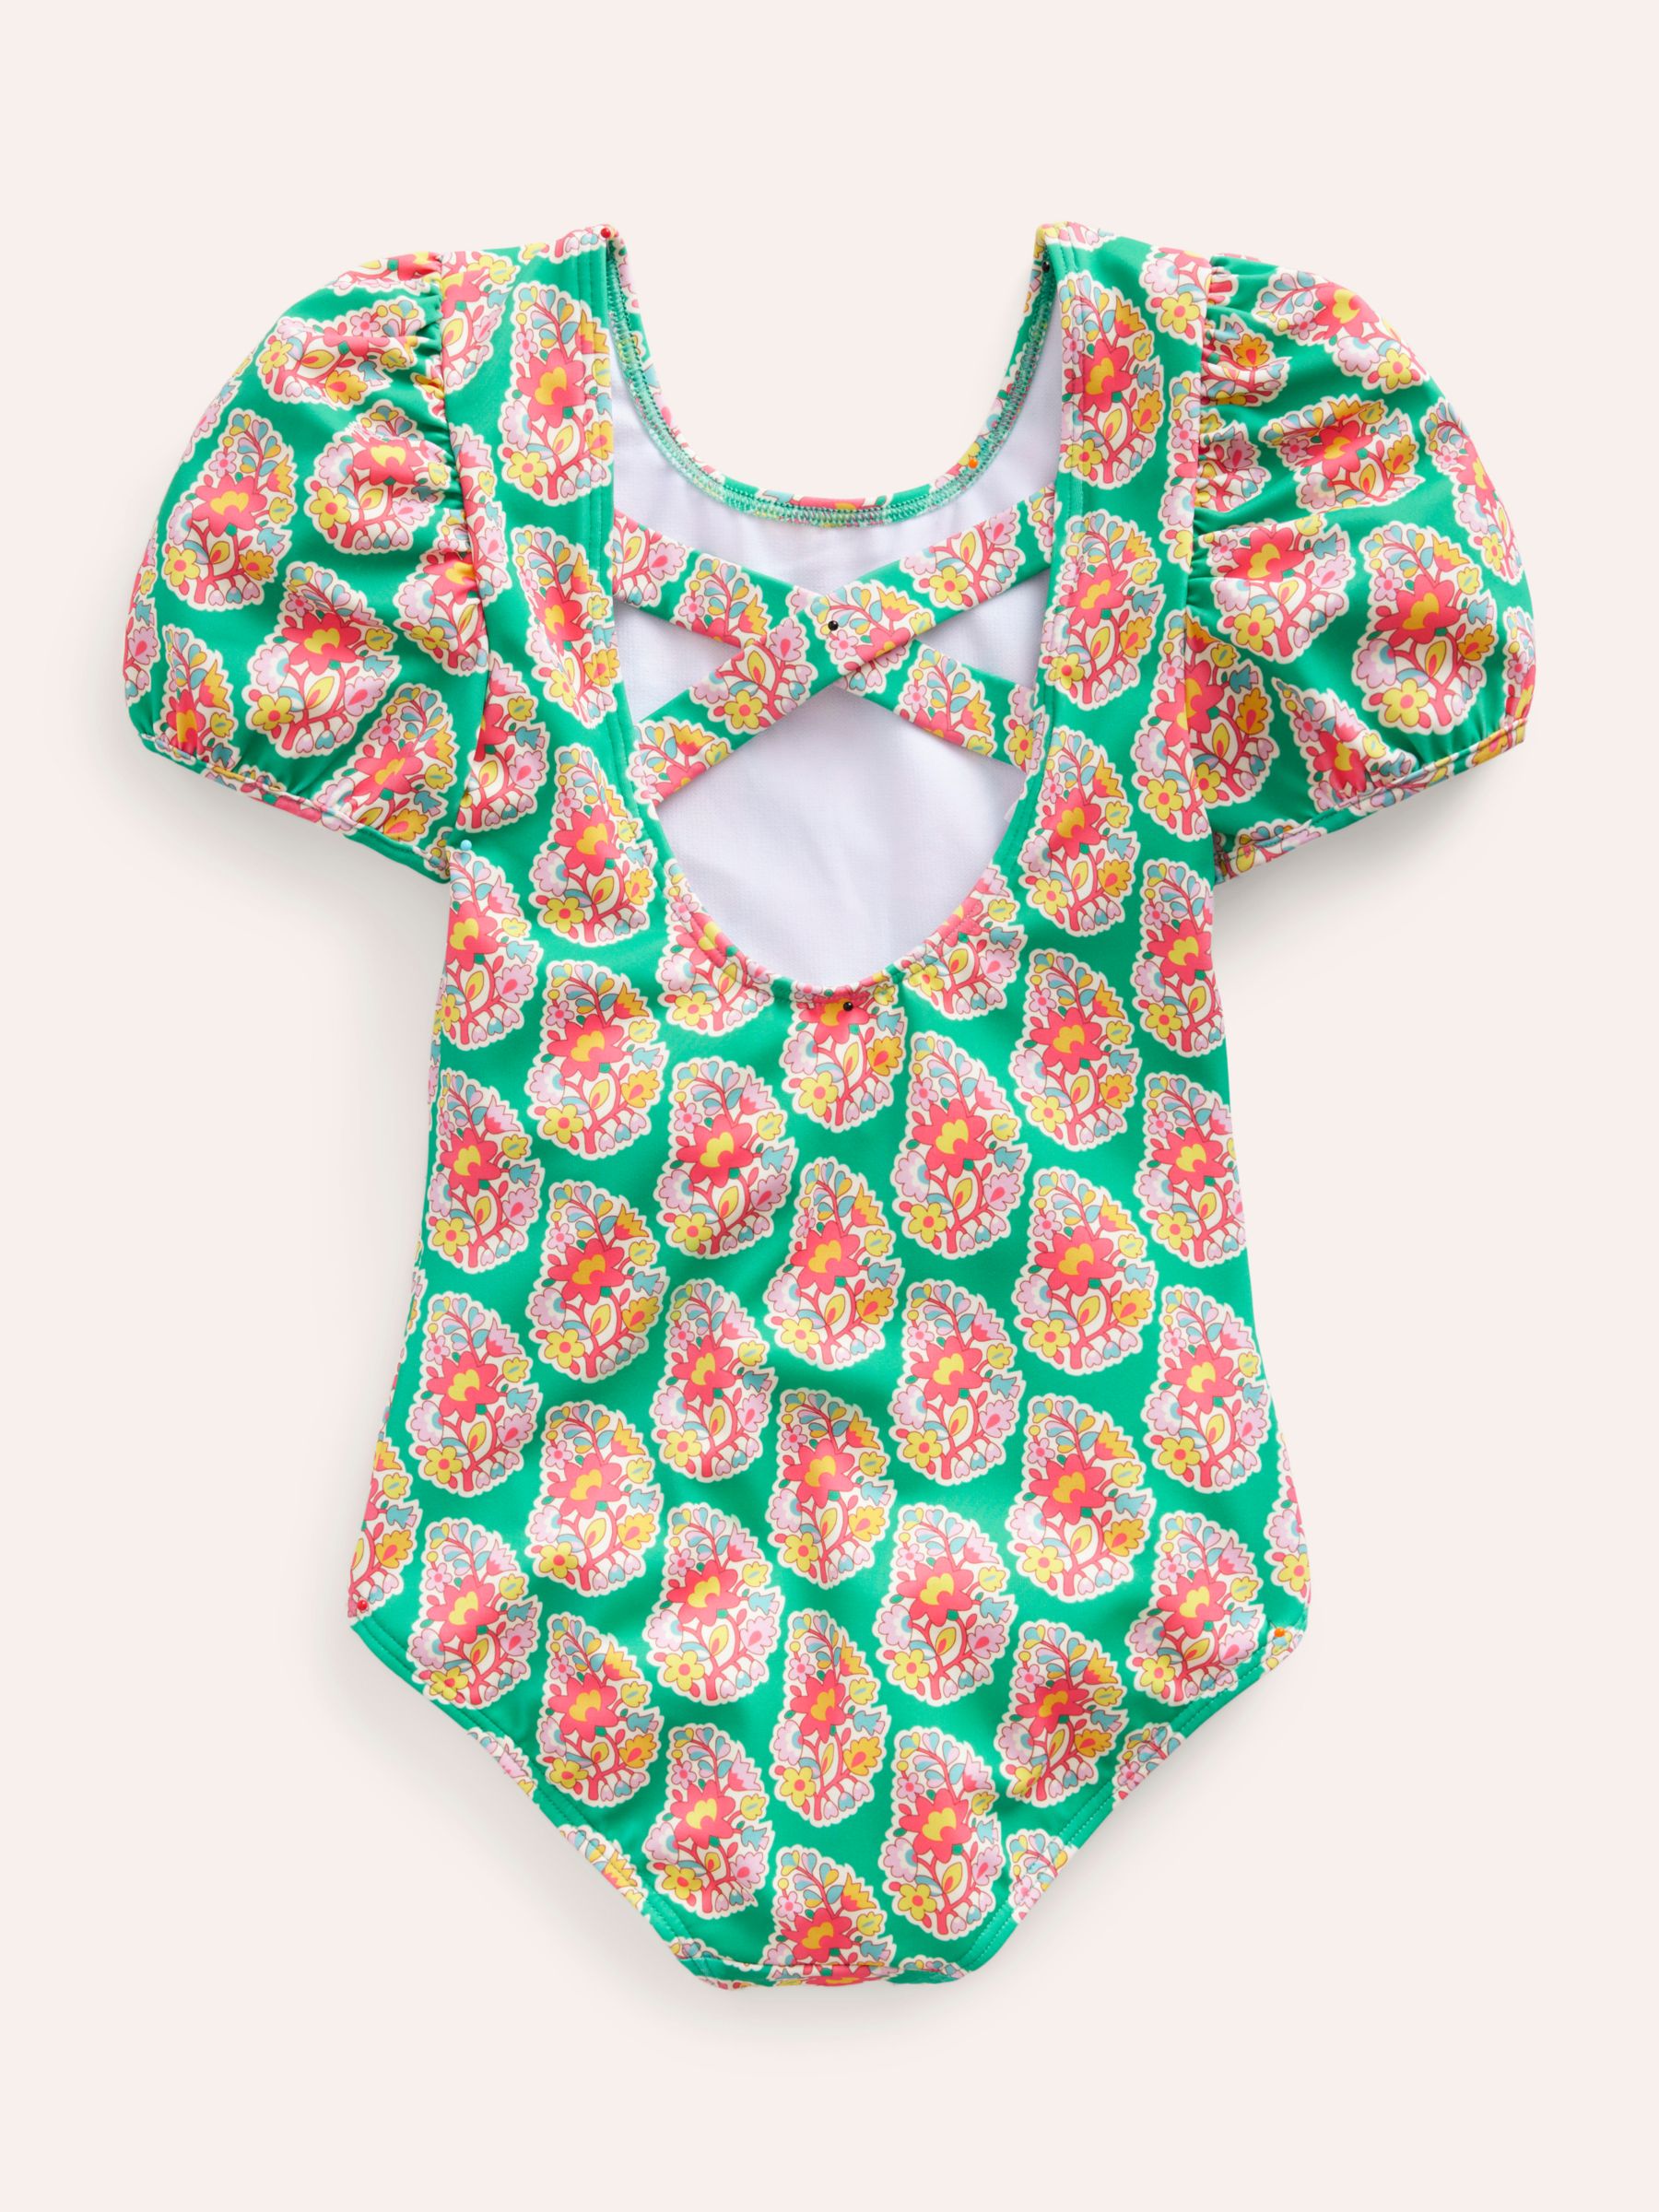 Buy Mini Boden Kids' Floral Print Puff Sleeve Swimsuit, Jade Green Paisley Online at johnlewis.com